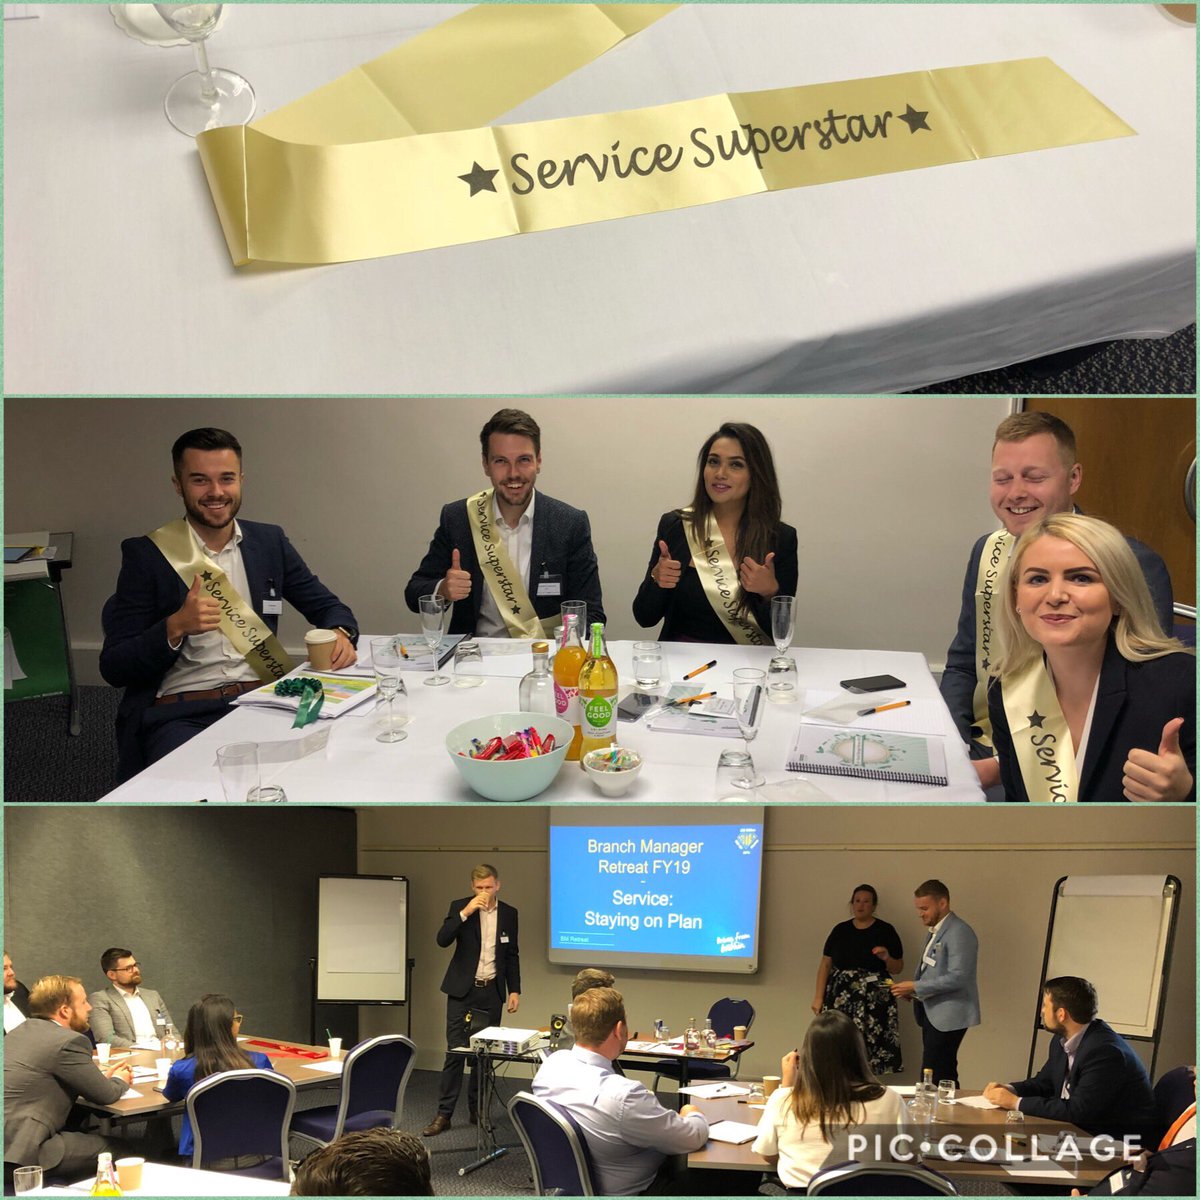 Kicking off the #SU4BRMRetreat with our EXCELLENT Customer Service breakout #roadto85 📈